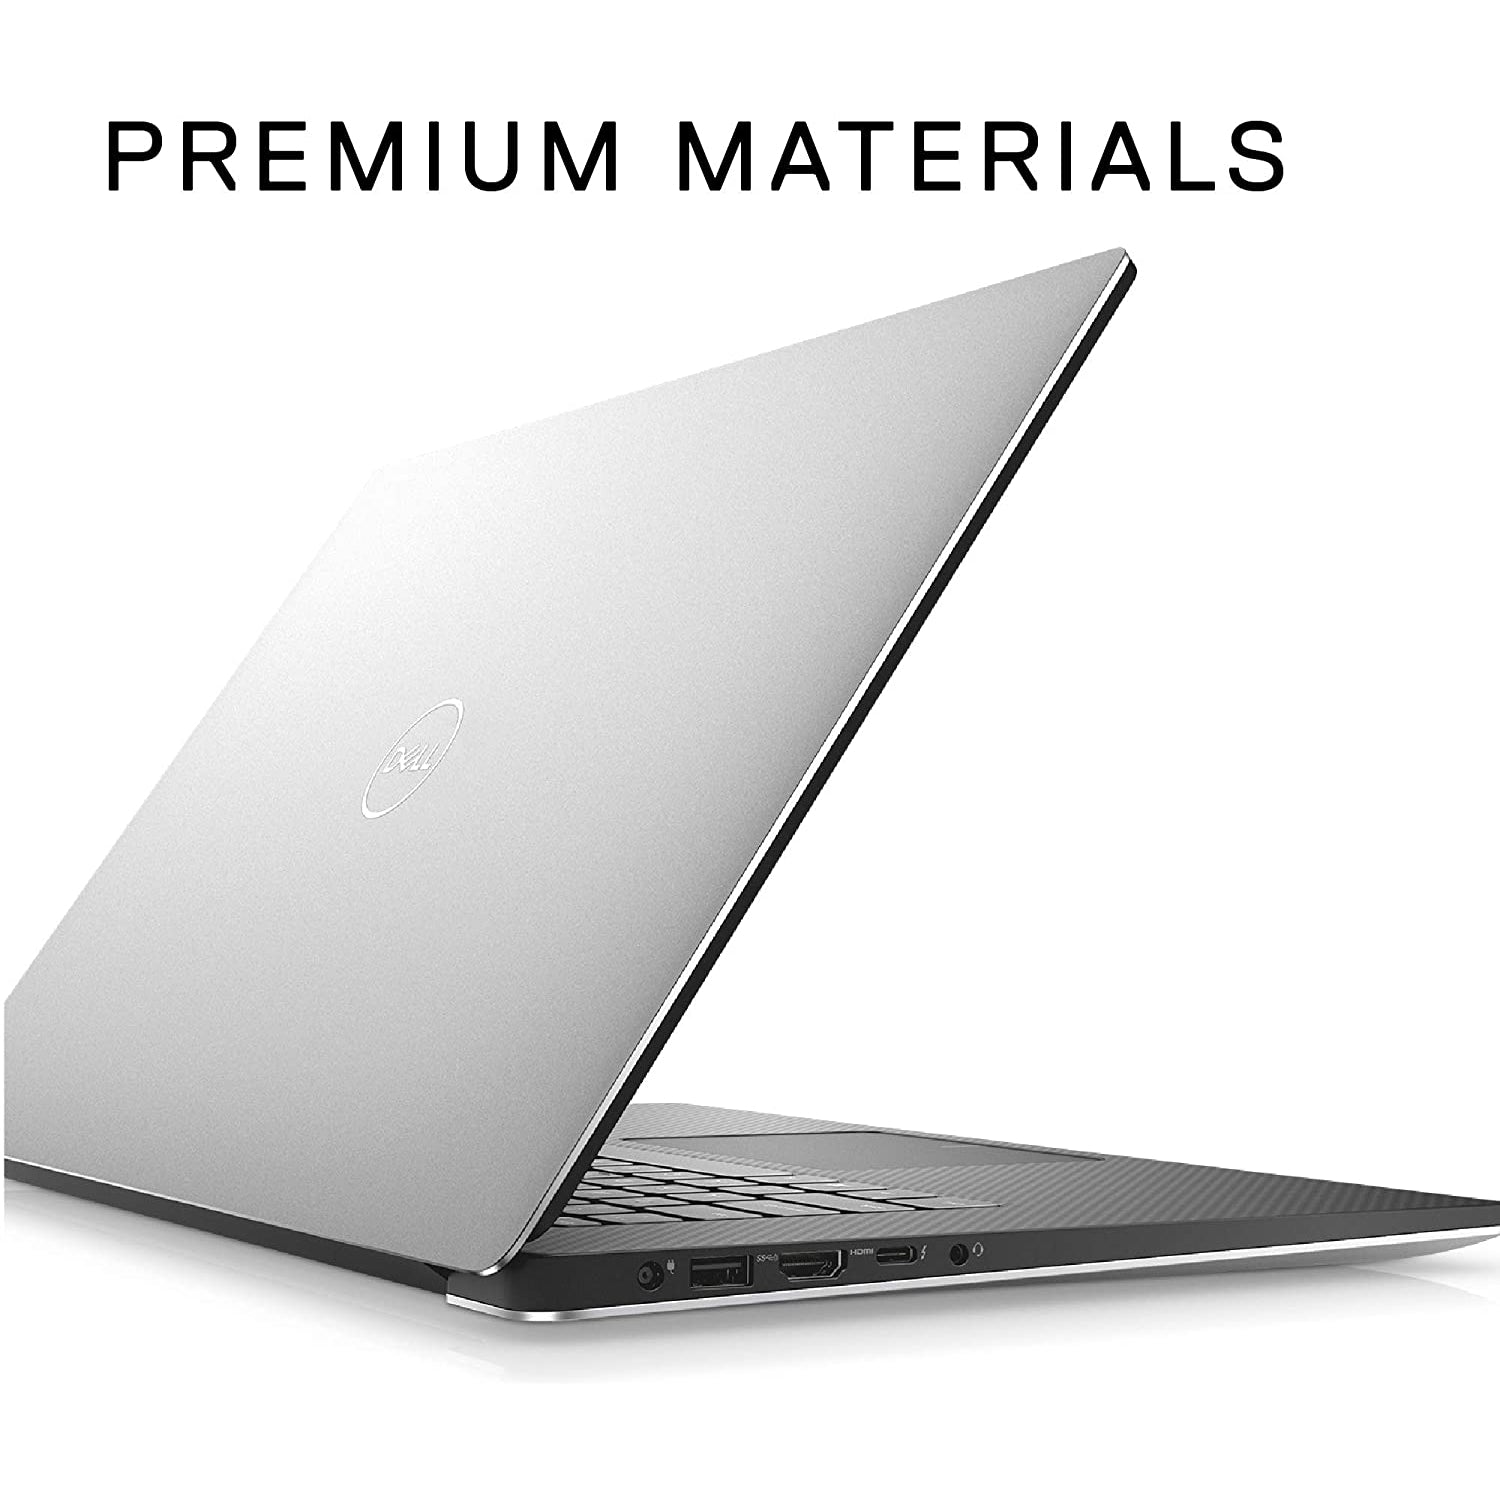 Dell XPS 13 FHD Thin and Light, InfinityEdge Laptop, Intel Core i5-10210U, 8 GB RAM, 256GB SSD, Windows 10 Home, Silver